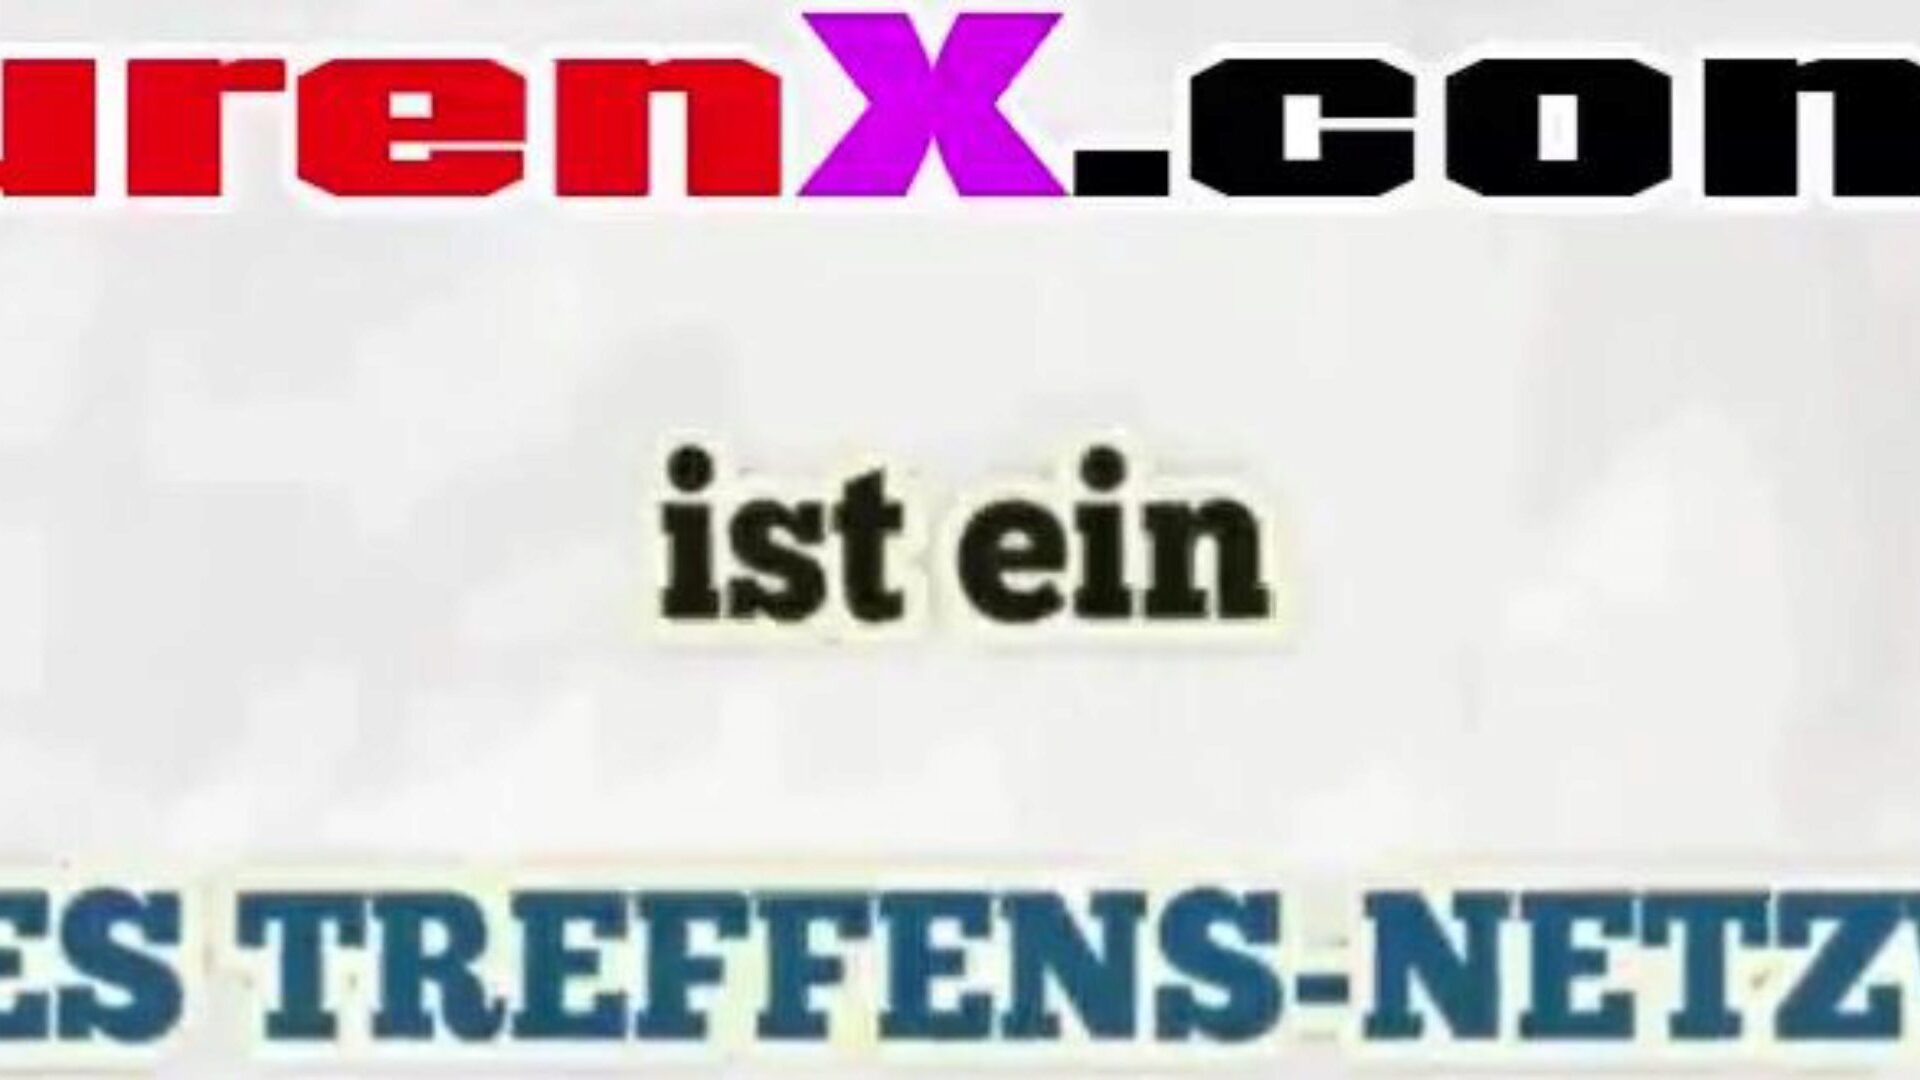 stiefmutter gefickt: free mutter jerman hd porn video f5 watch stiefmutter gefickt tube lovemaking video for free-for-all on xhamster, with the amazing bevy of German mutter γερμανικά & mutter tochter hd porno ταινία σκηνές συναυλίες